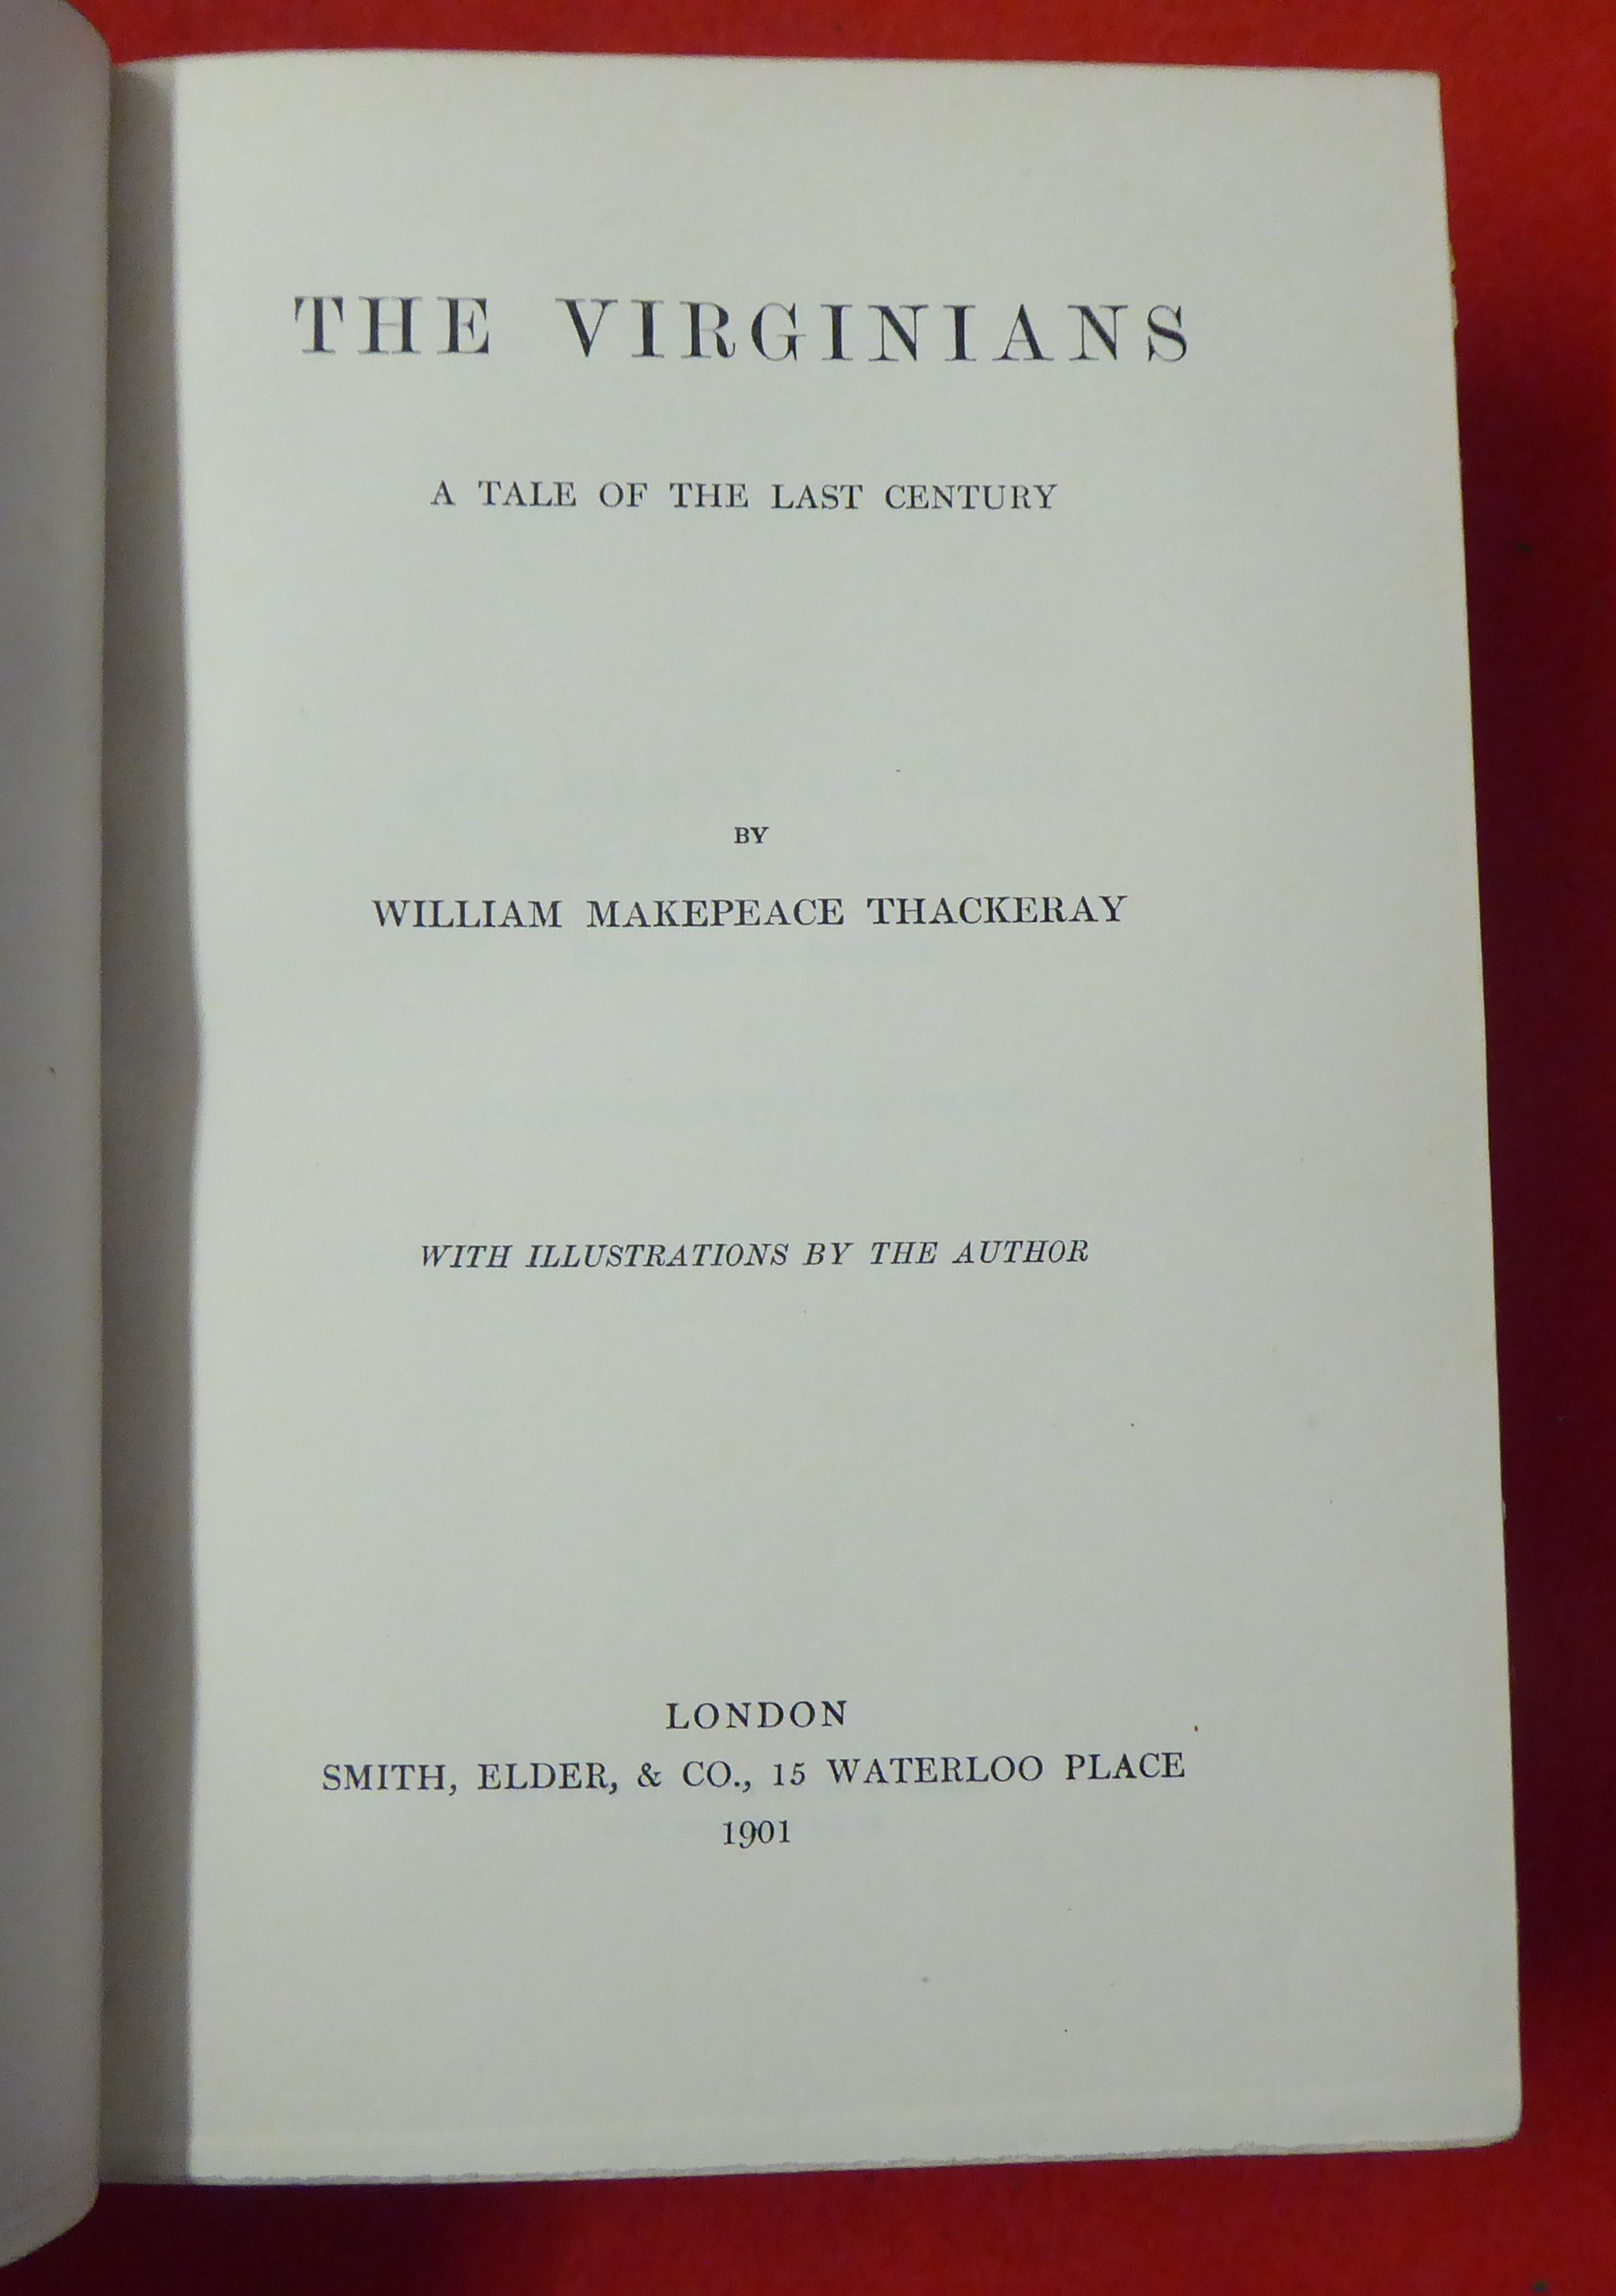 Books: 'The Works of William Makepeace Thackeray'  dated 1900, in thirteen volumes  (volume seven - Image 13 of 16